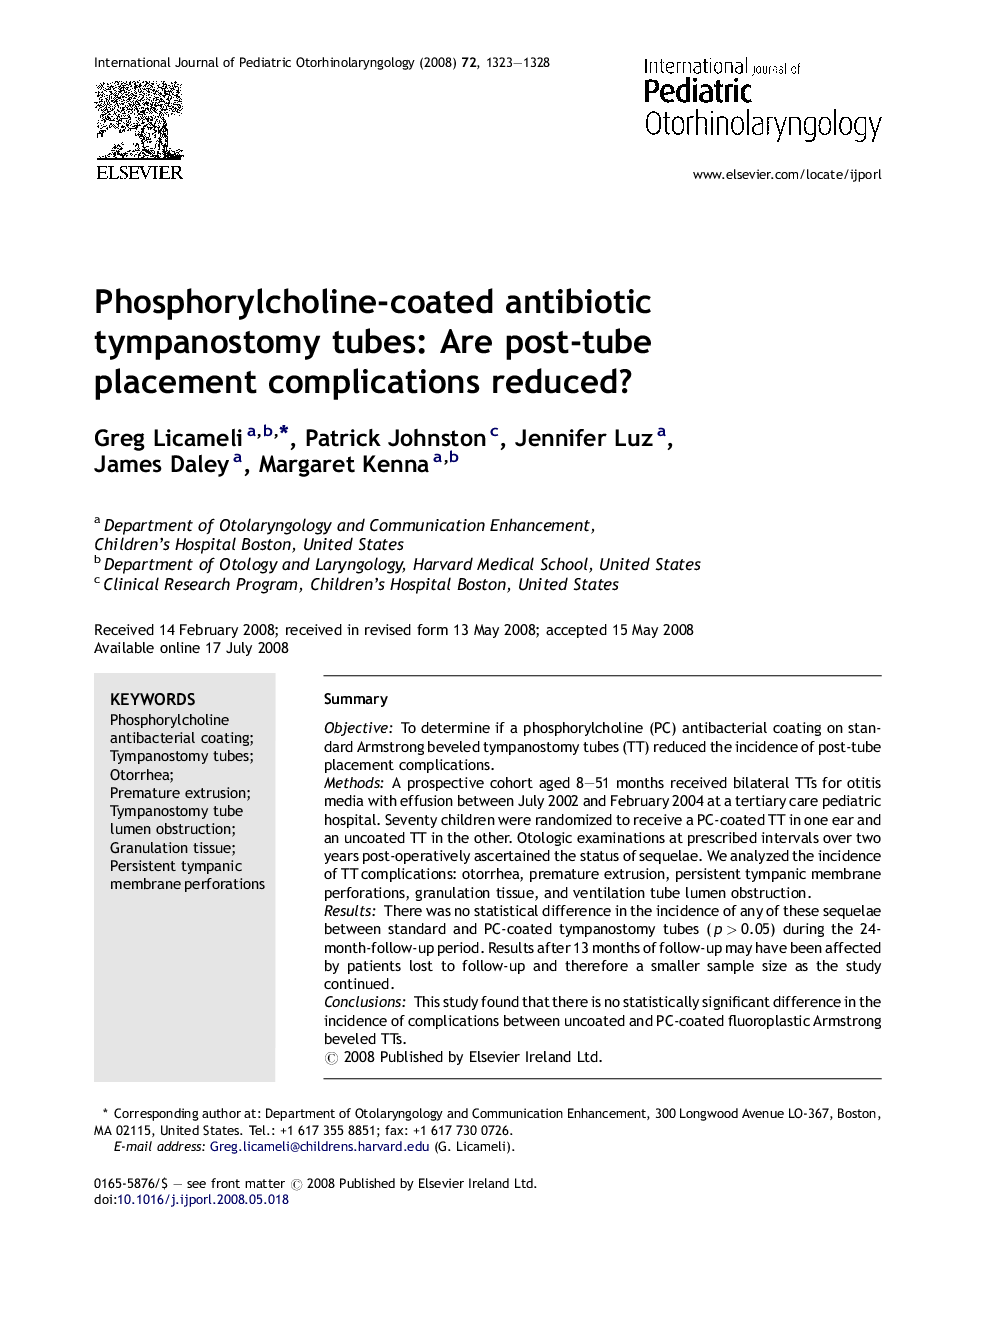 Phosphorylcholine-coated antibiotic tympanostomy tubes: Are post-tube placement complications reduced?